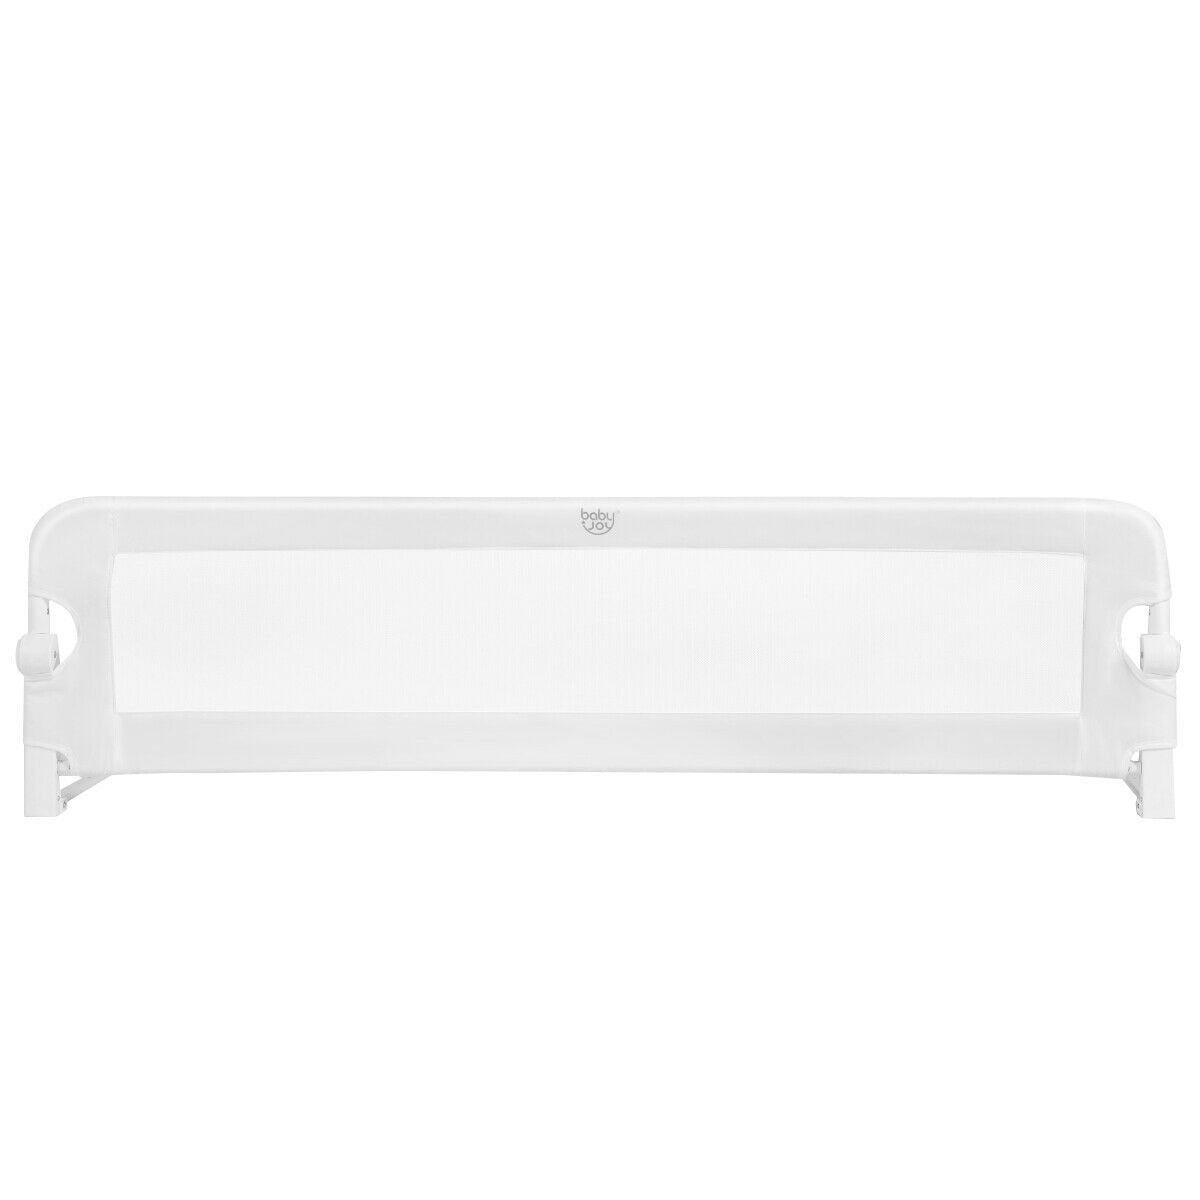 59-Inch Extra Long Bed Rail Guard, White